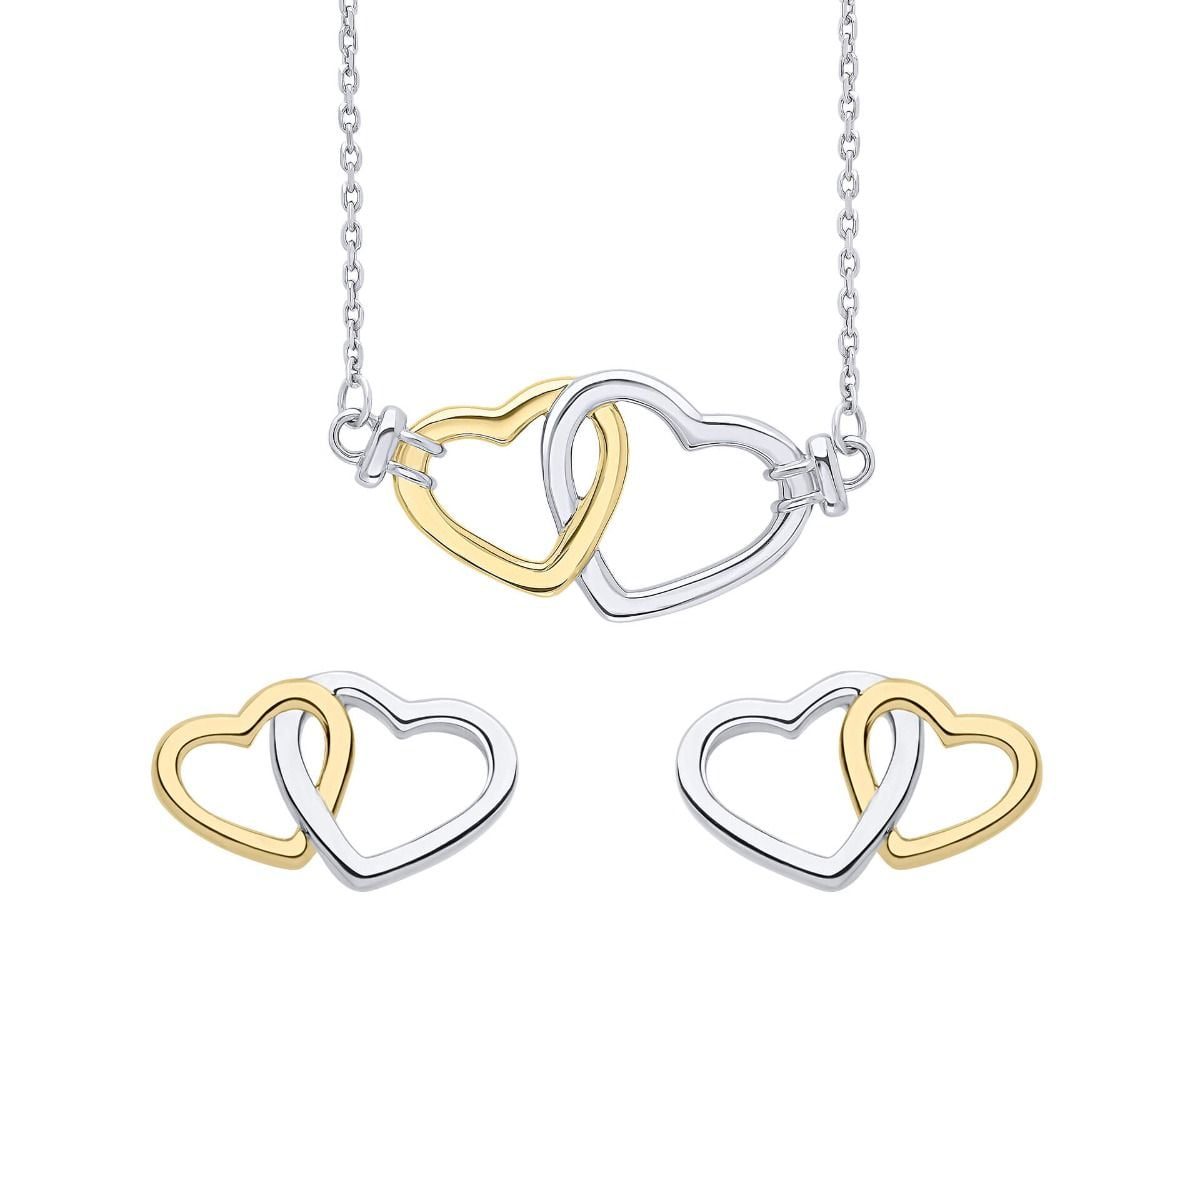 Fiorelli Valentine Double Heart Necklace and Earrings Set